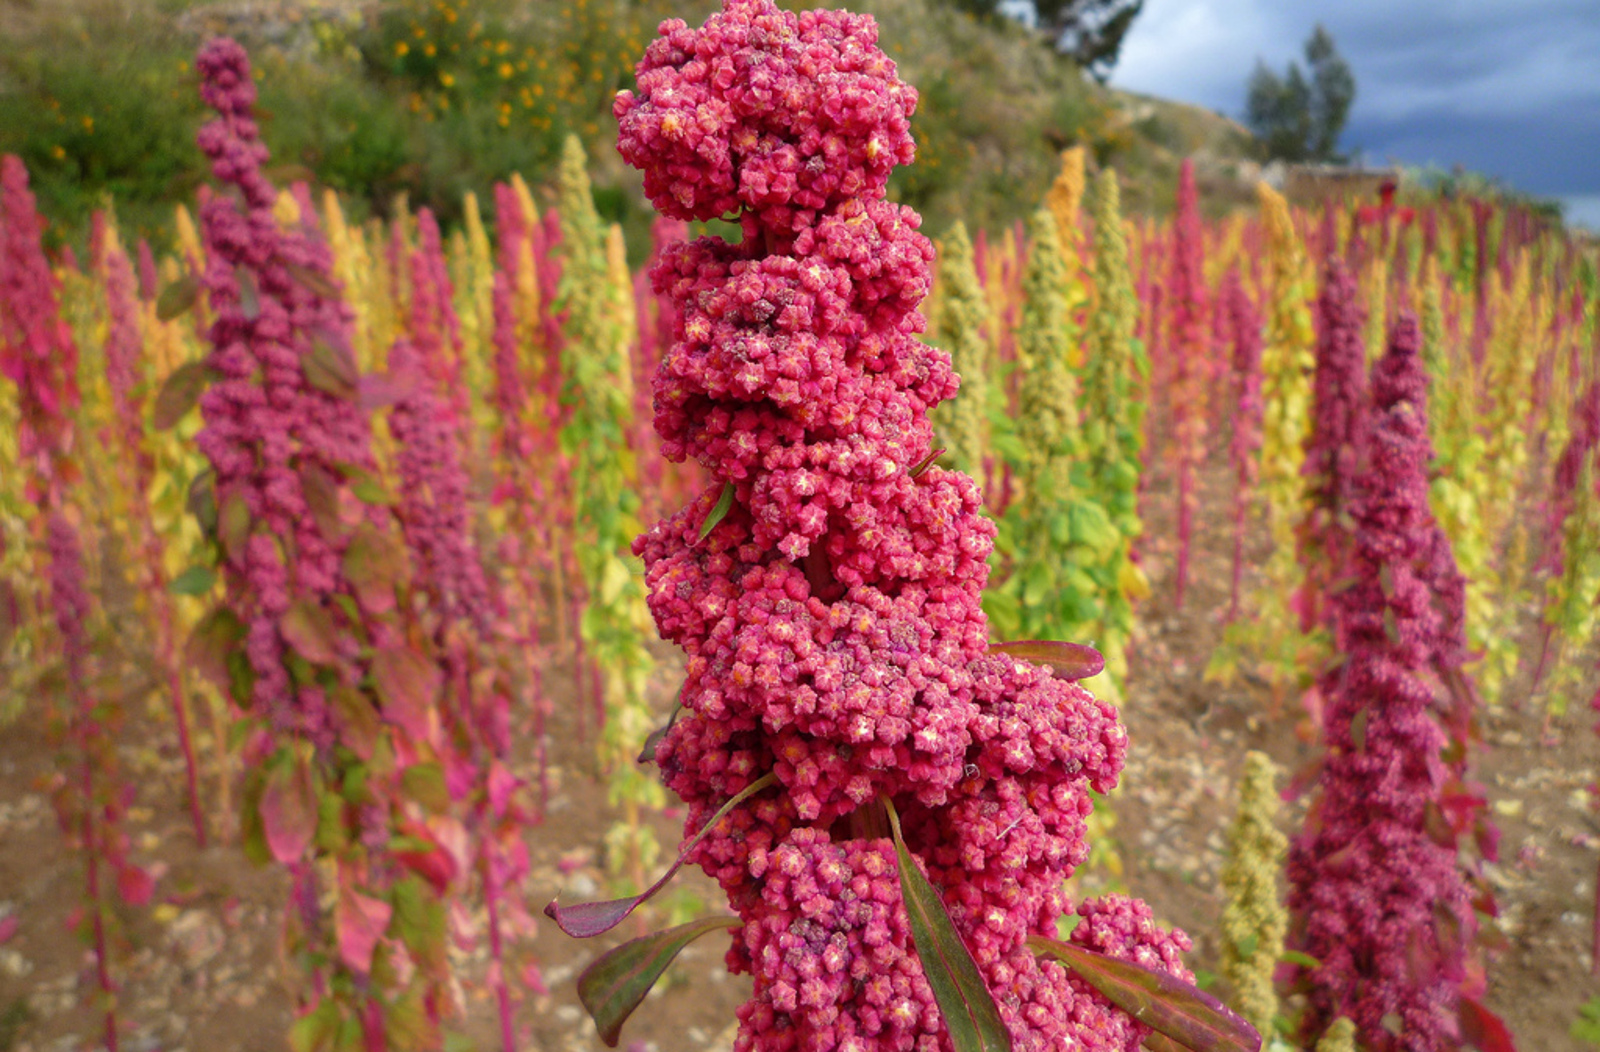 How Our Demand For Quinoa Is Shaping Monocultures And Damaging Biodiversity